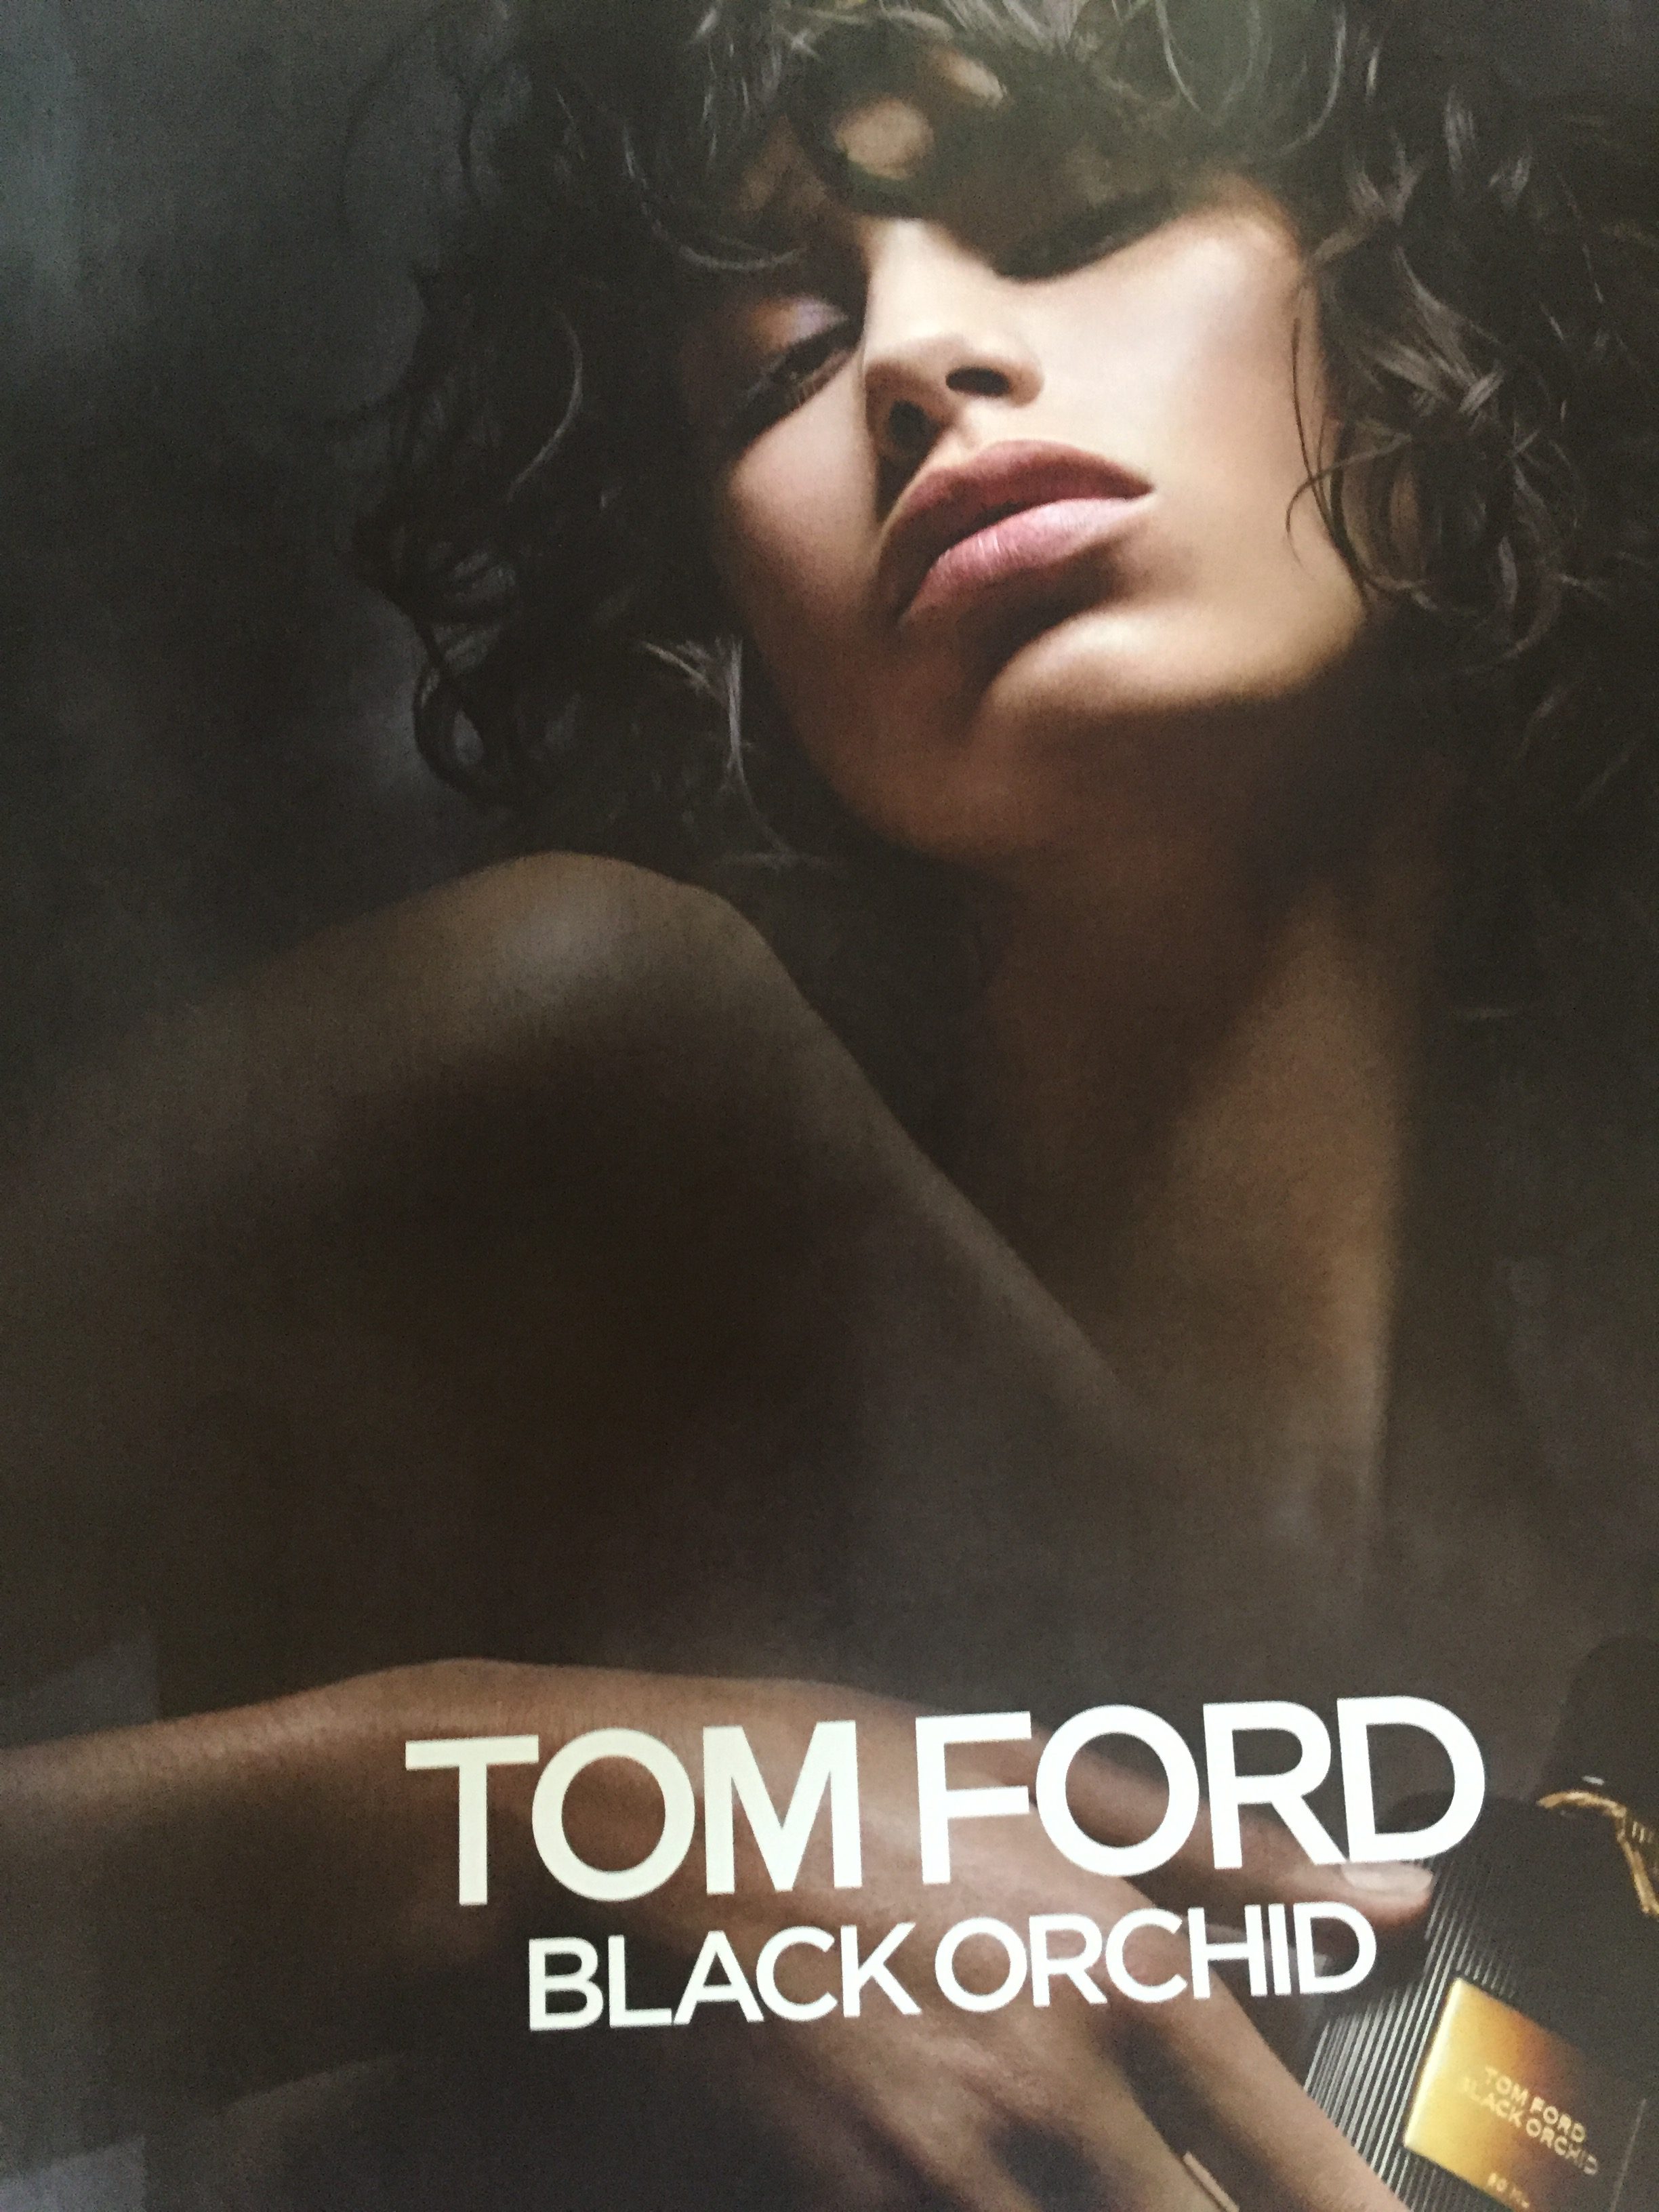 BLACK ORCHID BY TOM FORD - My Fabulous Fragrance